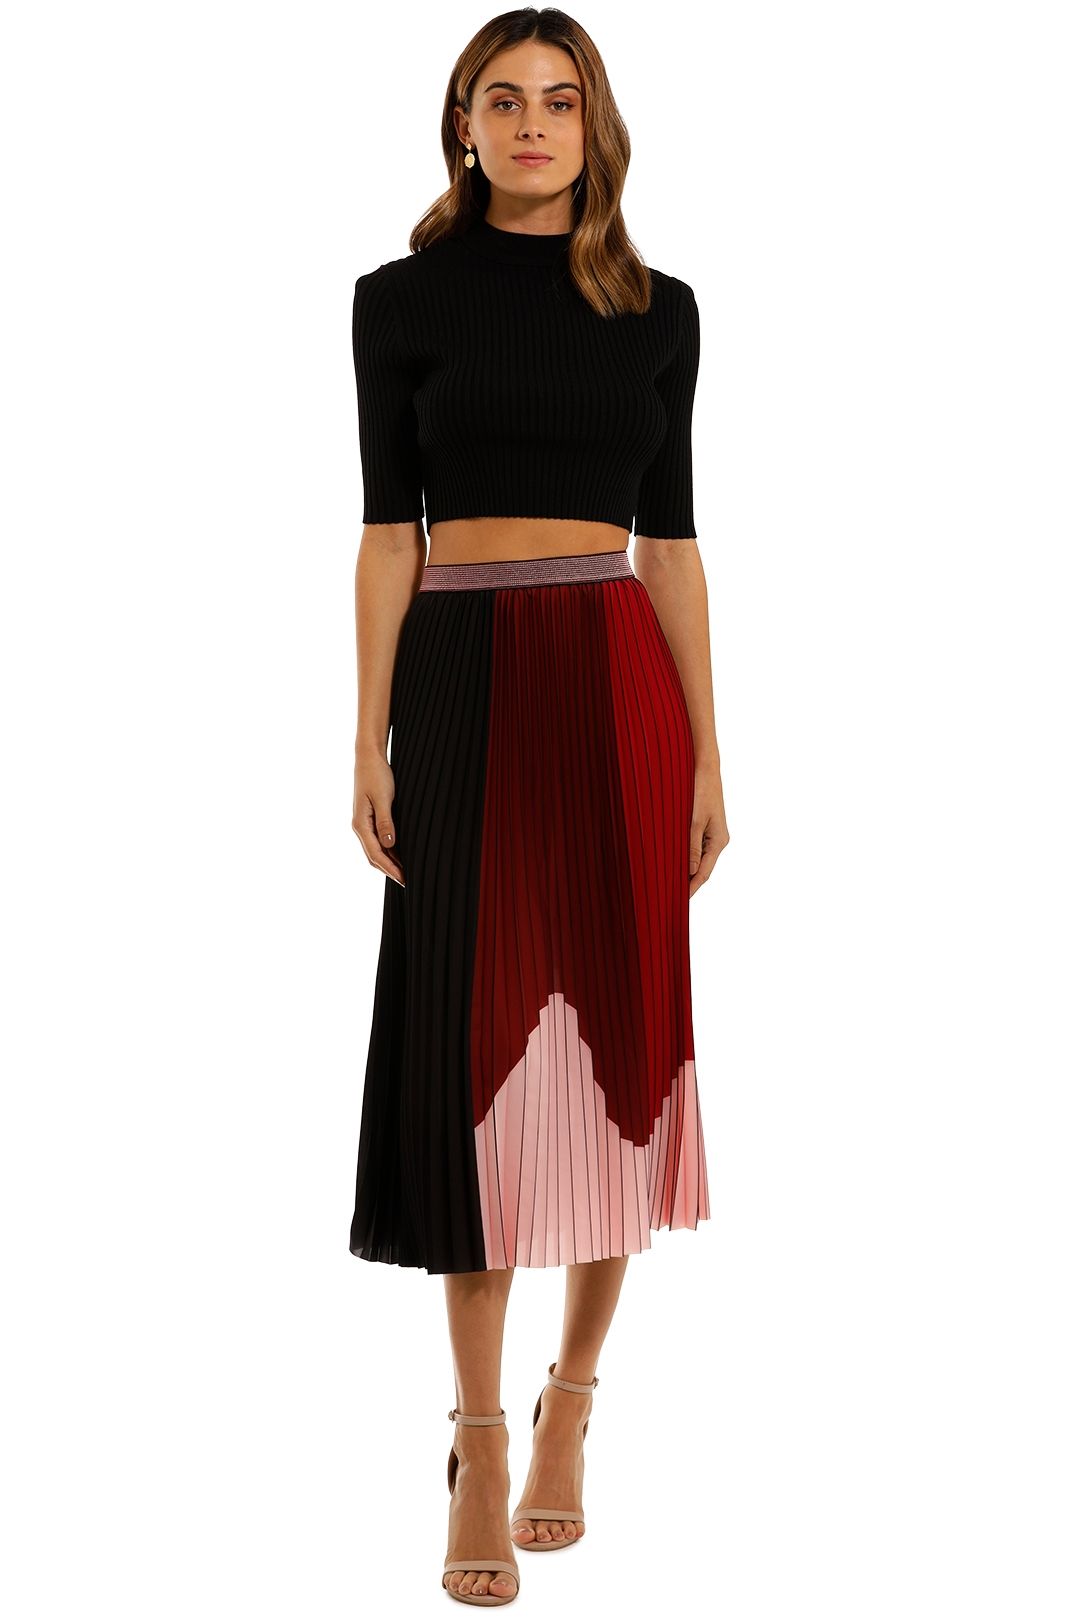 Coop by Trelise Cooper Pleat Emotion Skirt Wine Mix